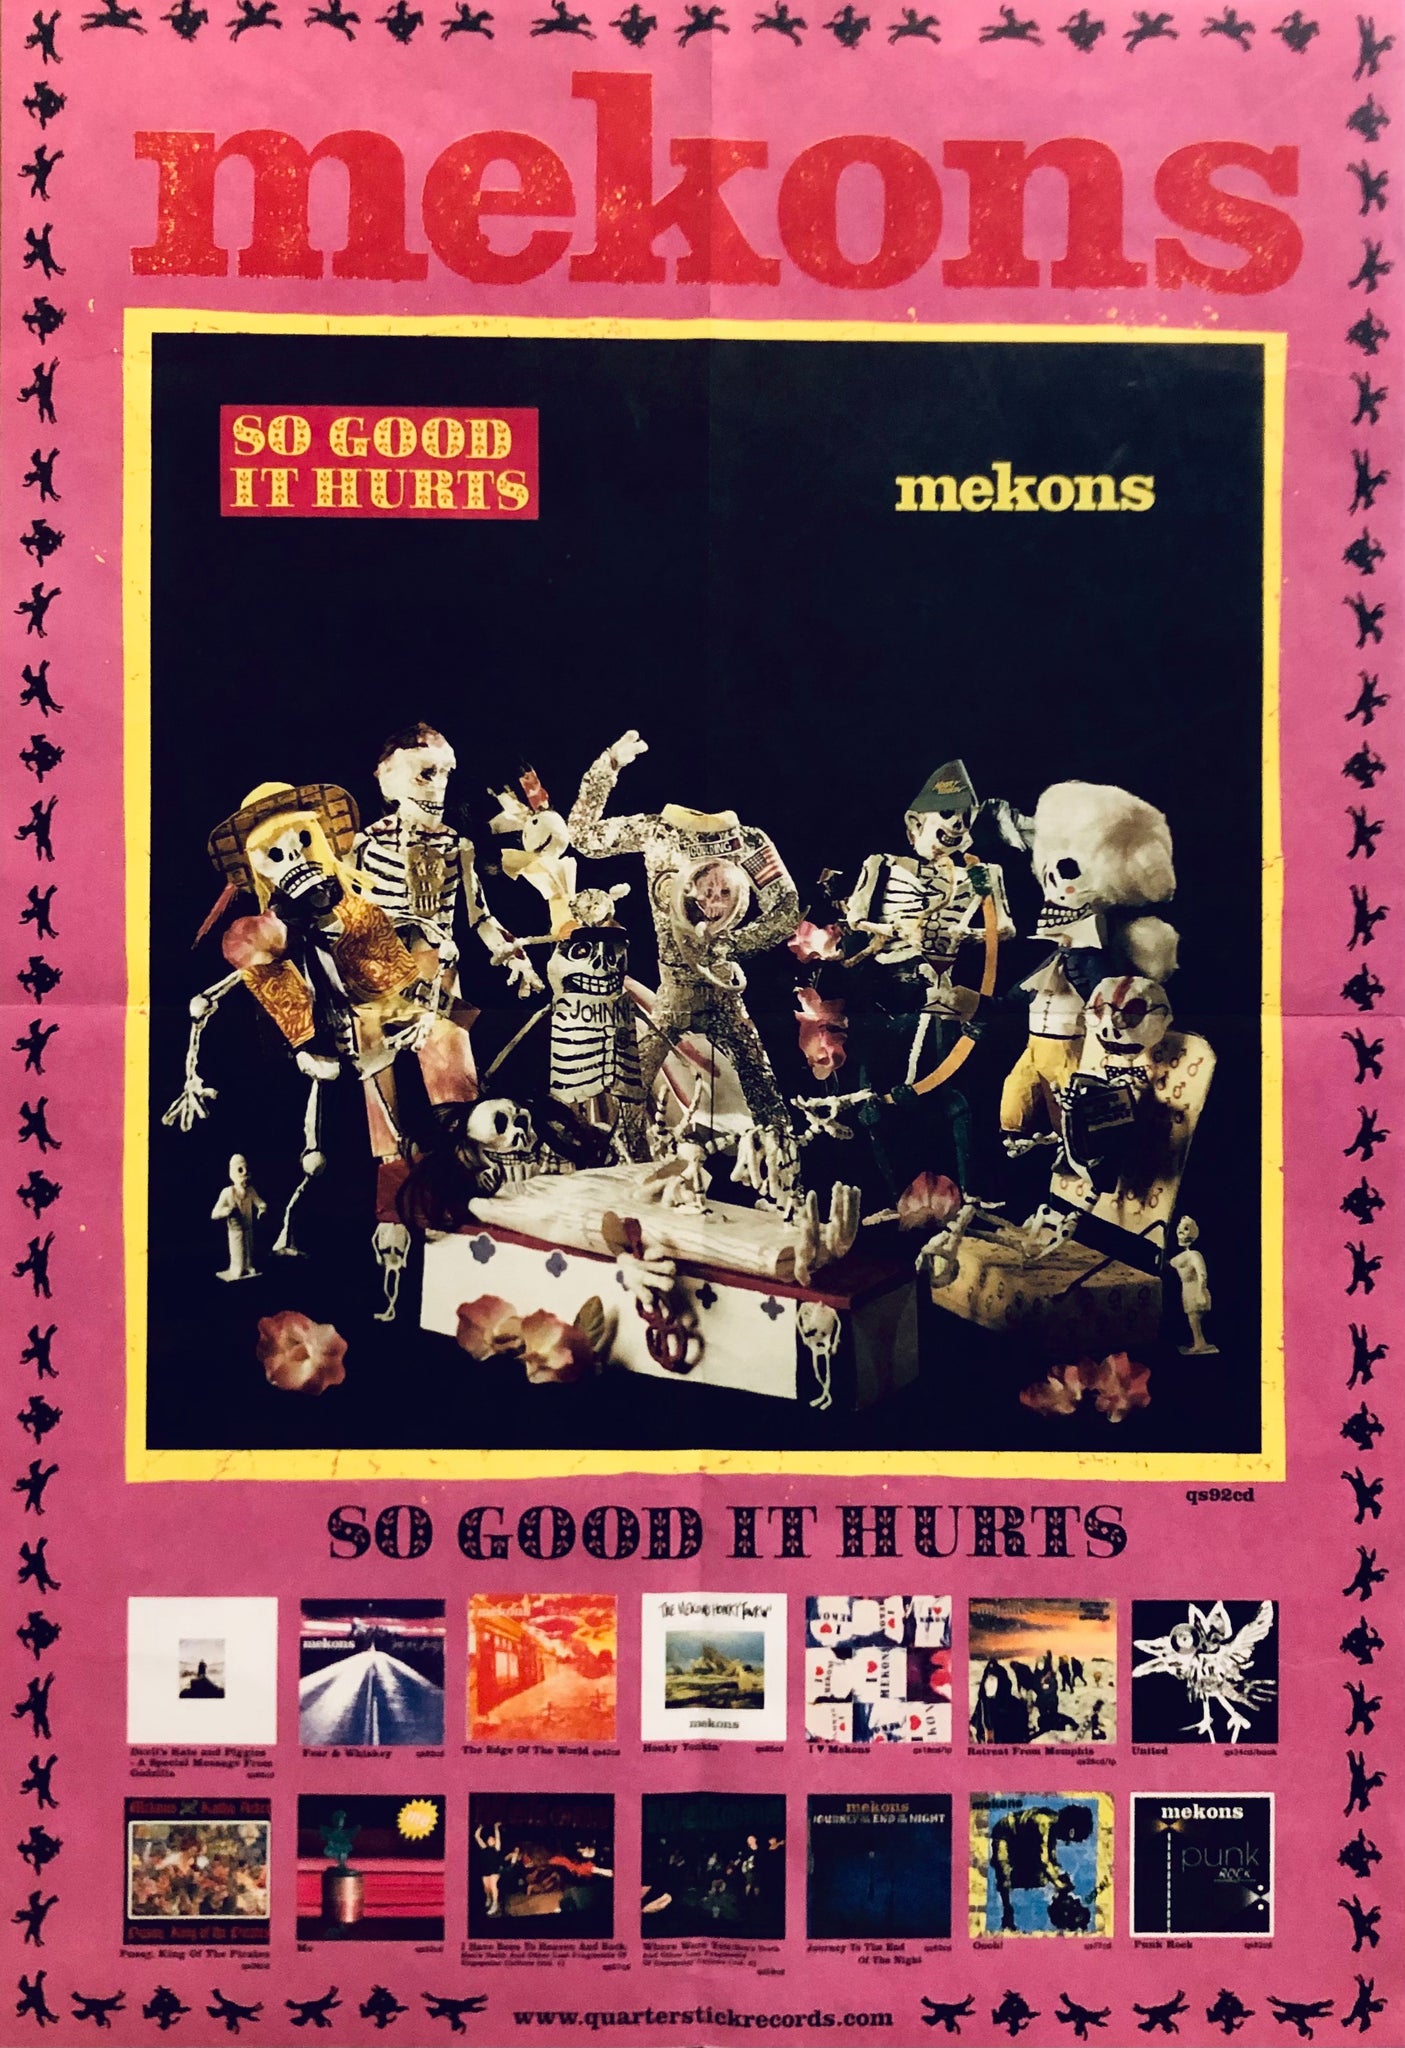 The Mekons – So Good It Hurts - 13" x 19" Promo Poster p0137